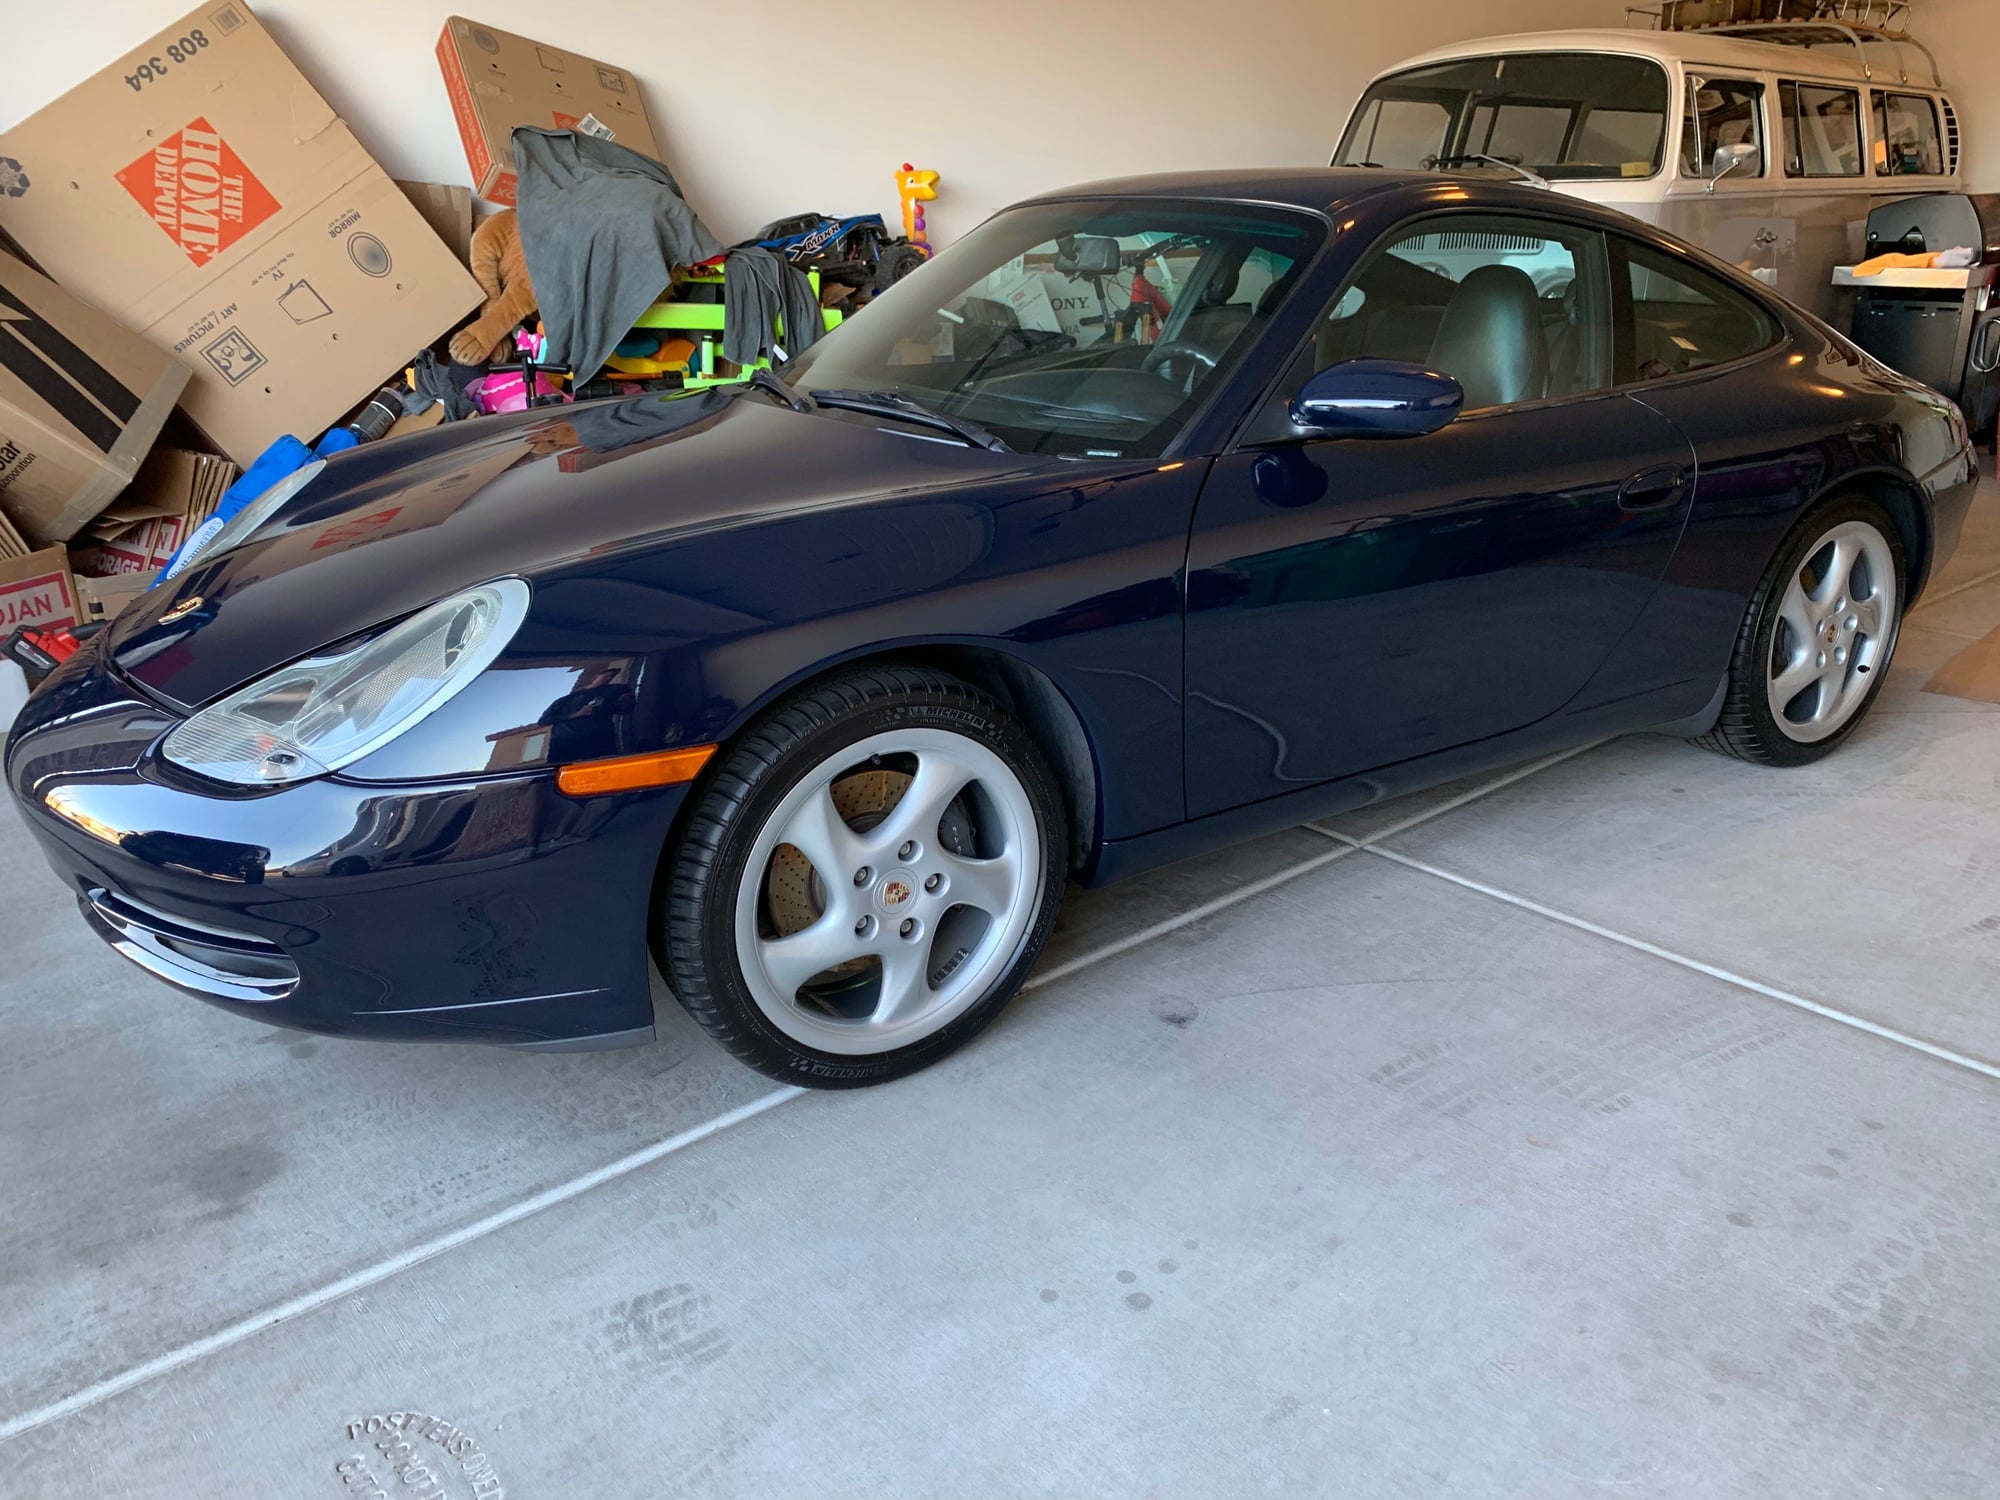 2001 Porsche 911 - 2001 Carrera 996 - Brand New Paint! - Used - VIN Wp0aa29941s621908 - 112,800 Miles - 6 cyl - 2WD - Manual - Coupe - Blue - Litchfield Park, AZ 85340, United States